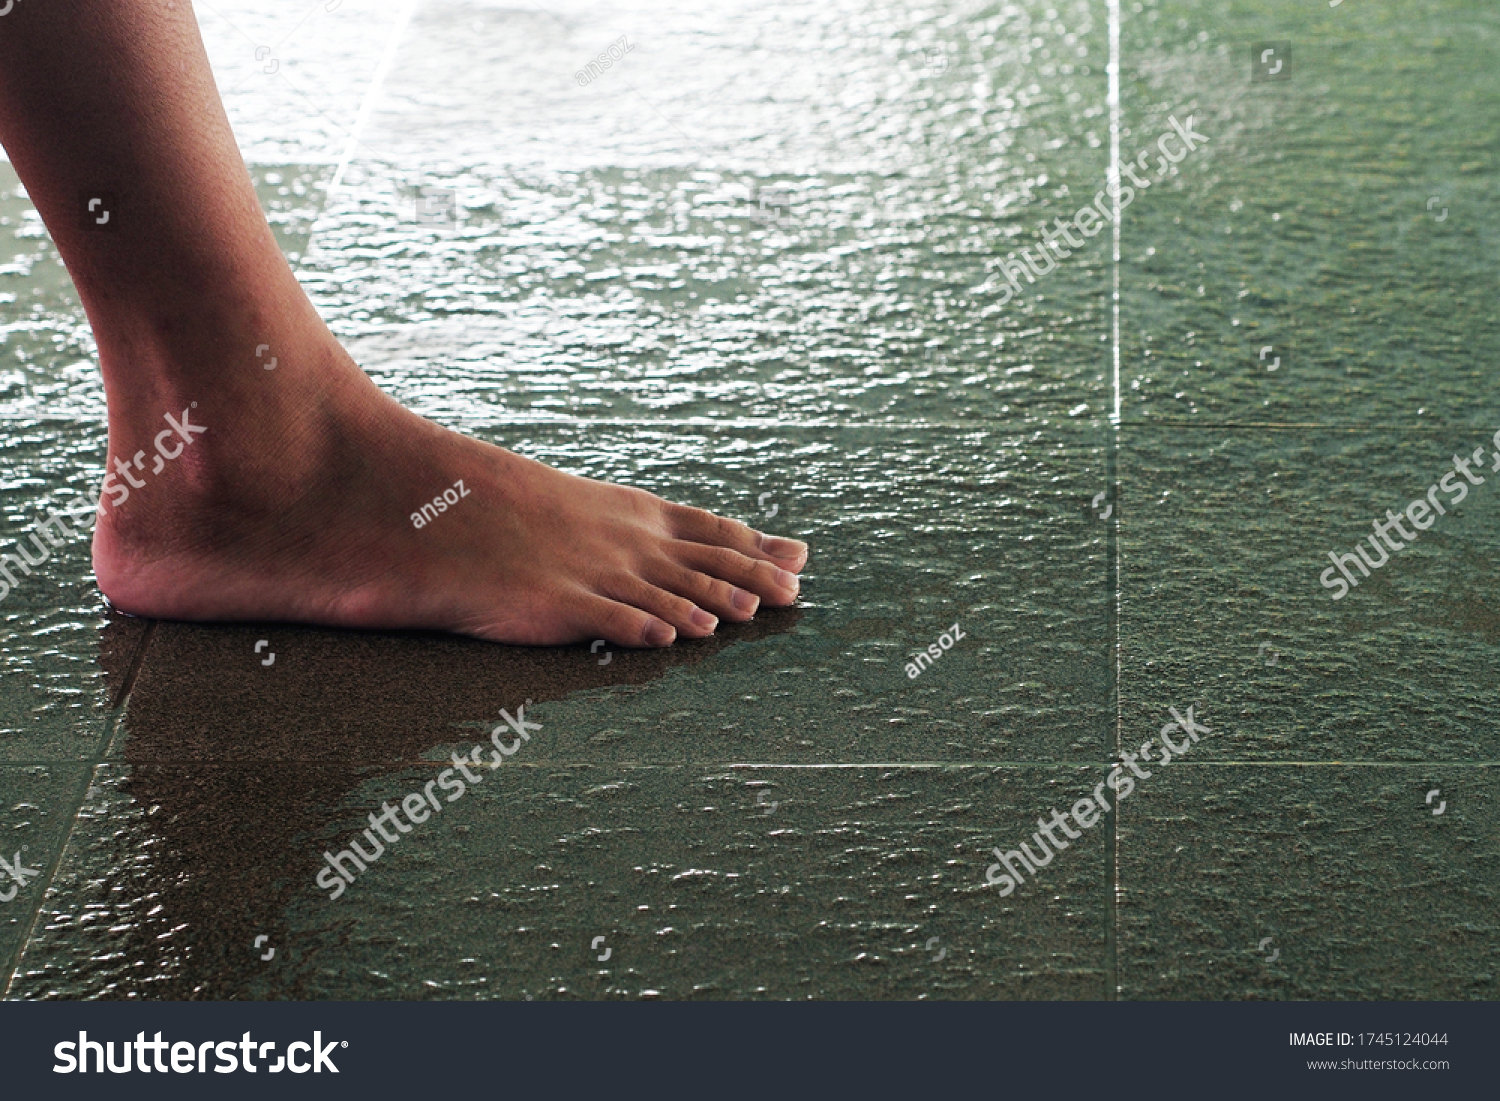 Non-slip floor tiles of the swimming pool with feet clipping path #1745124044